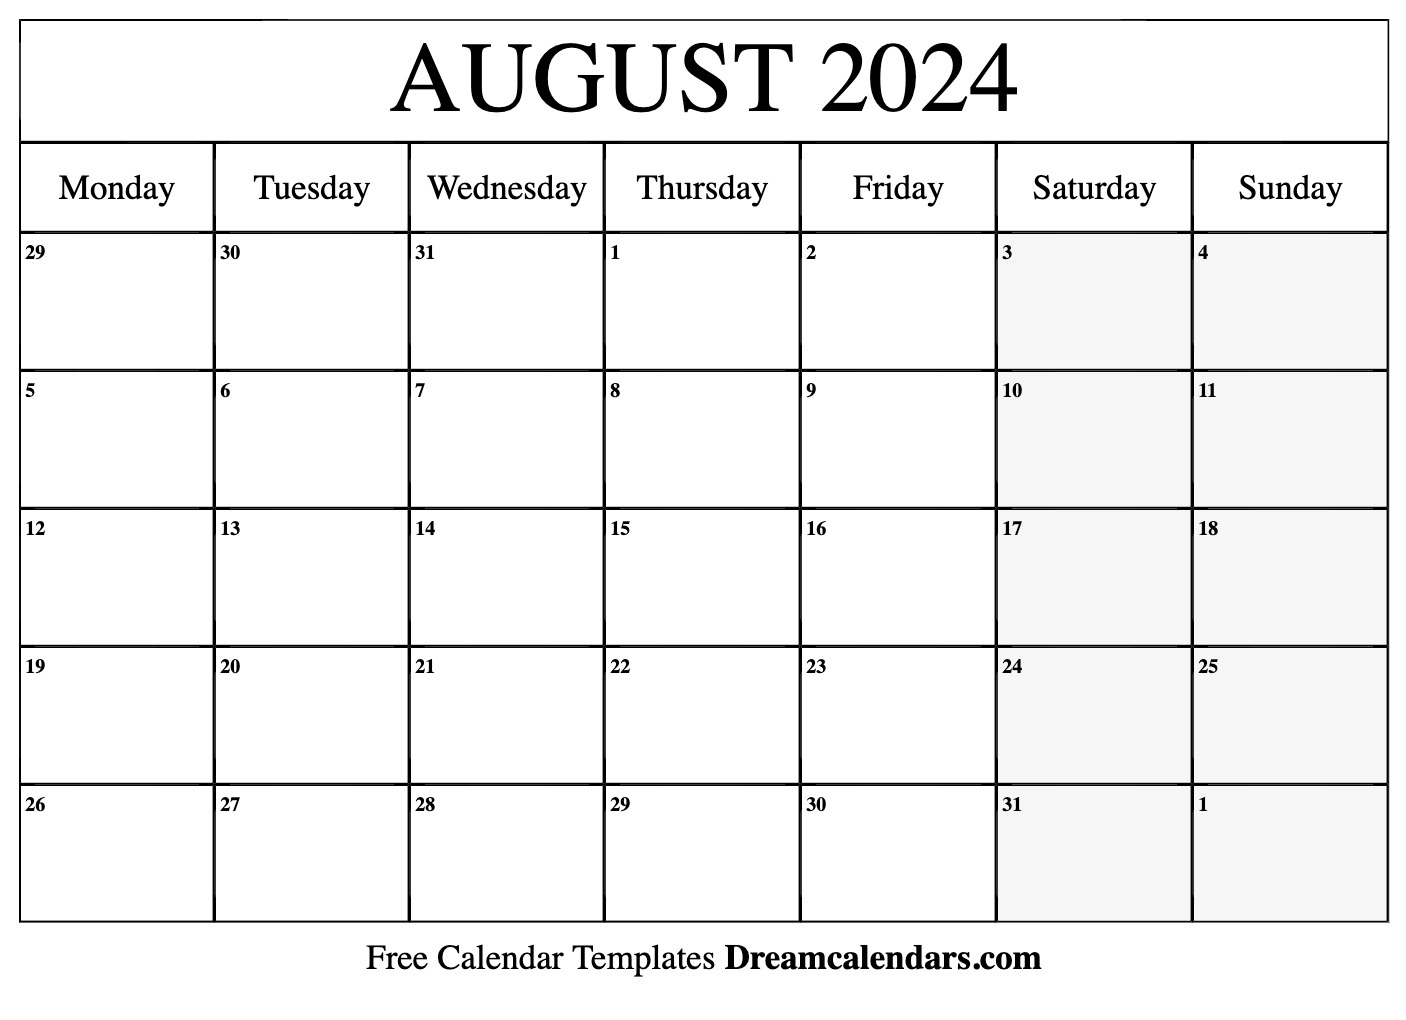 August 2024 Calendar | Free Blank Printable With Holidays intended for Free Printable Calendar Aug 2024